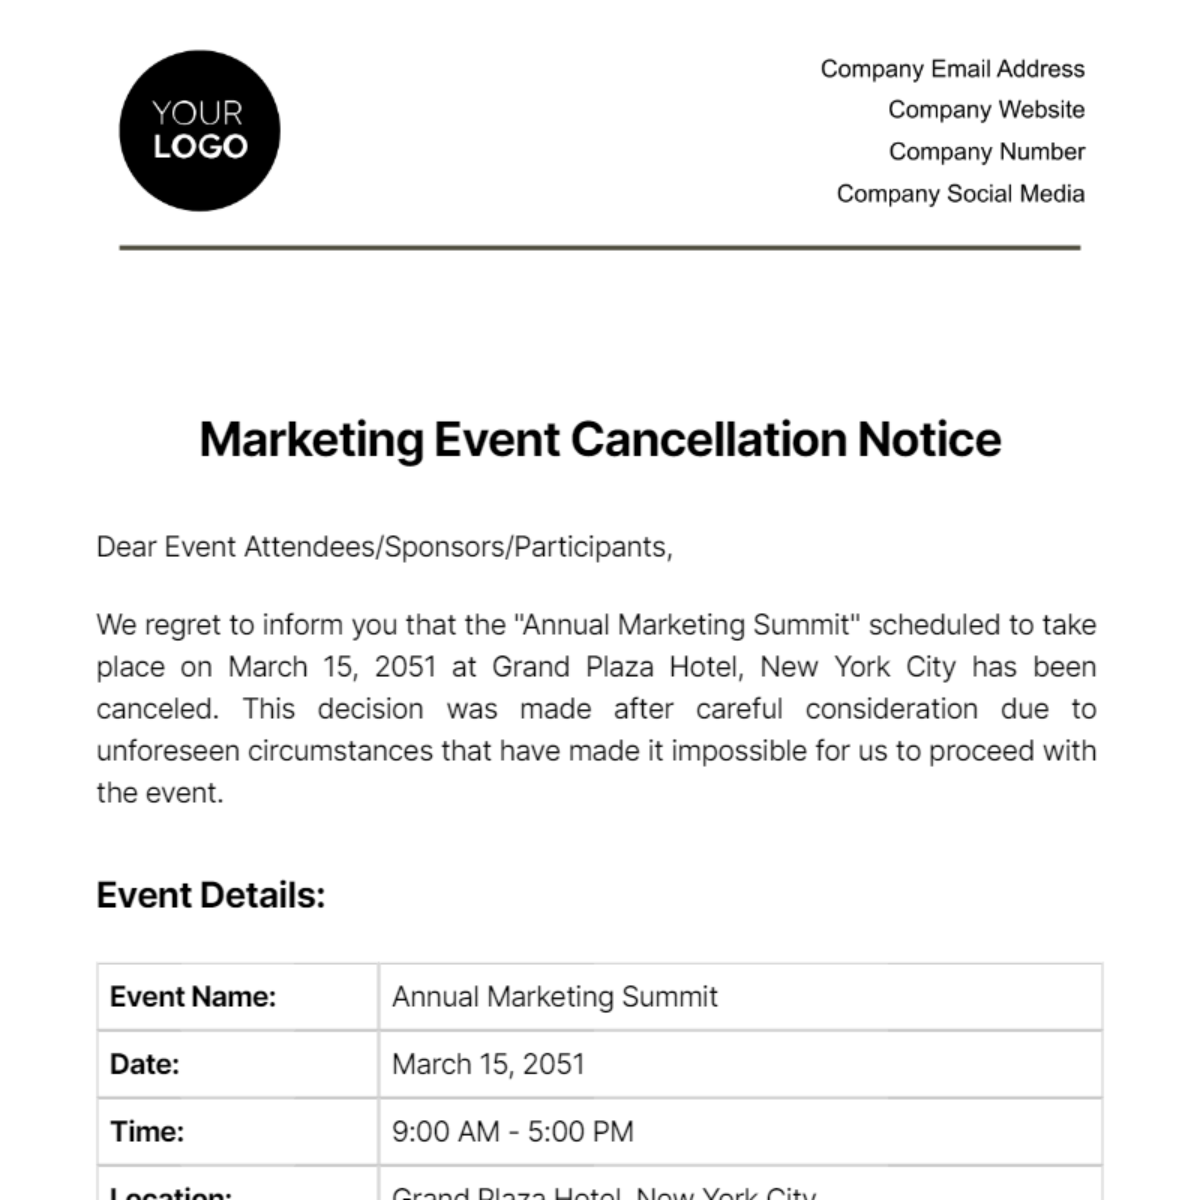 Marketing Event Cancellation Notice Template